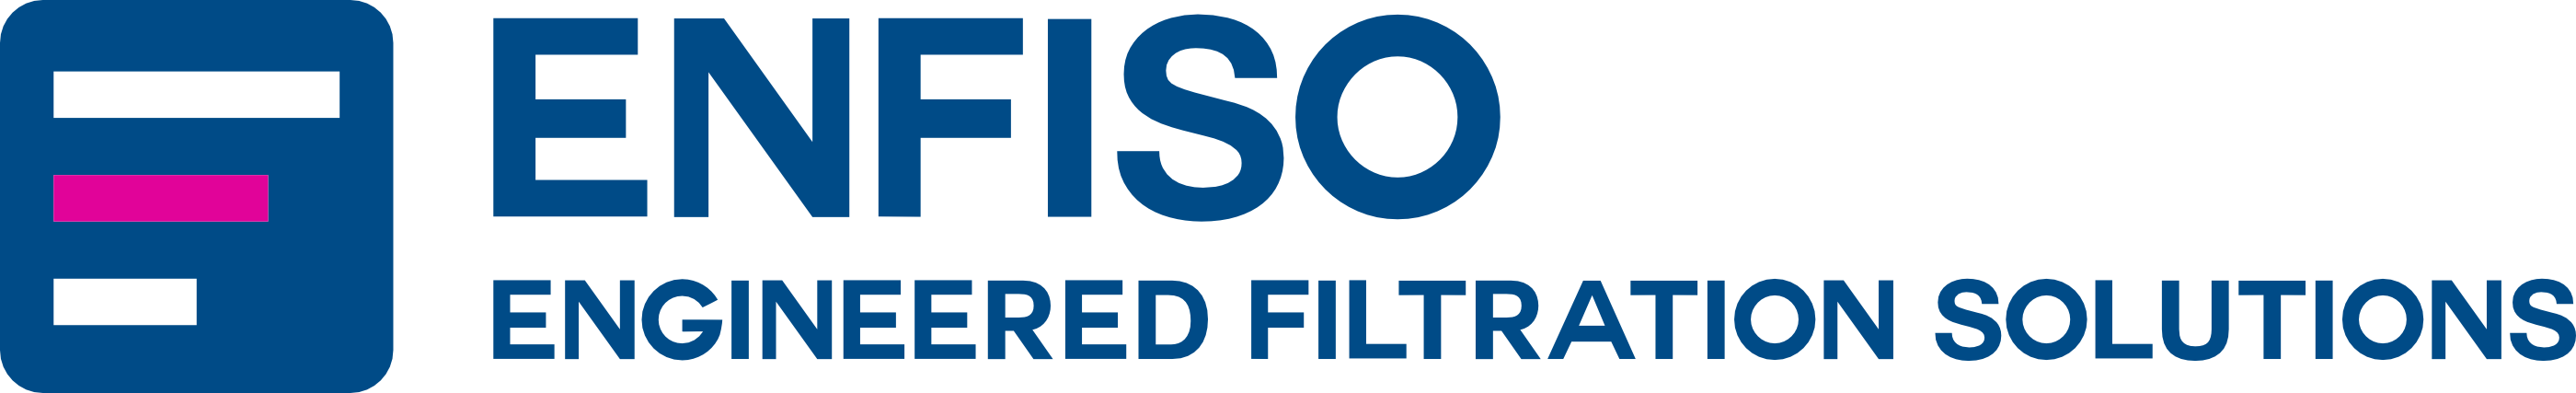 ENFISO Engineered Filtration Solutions